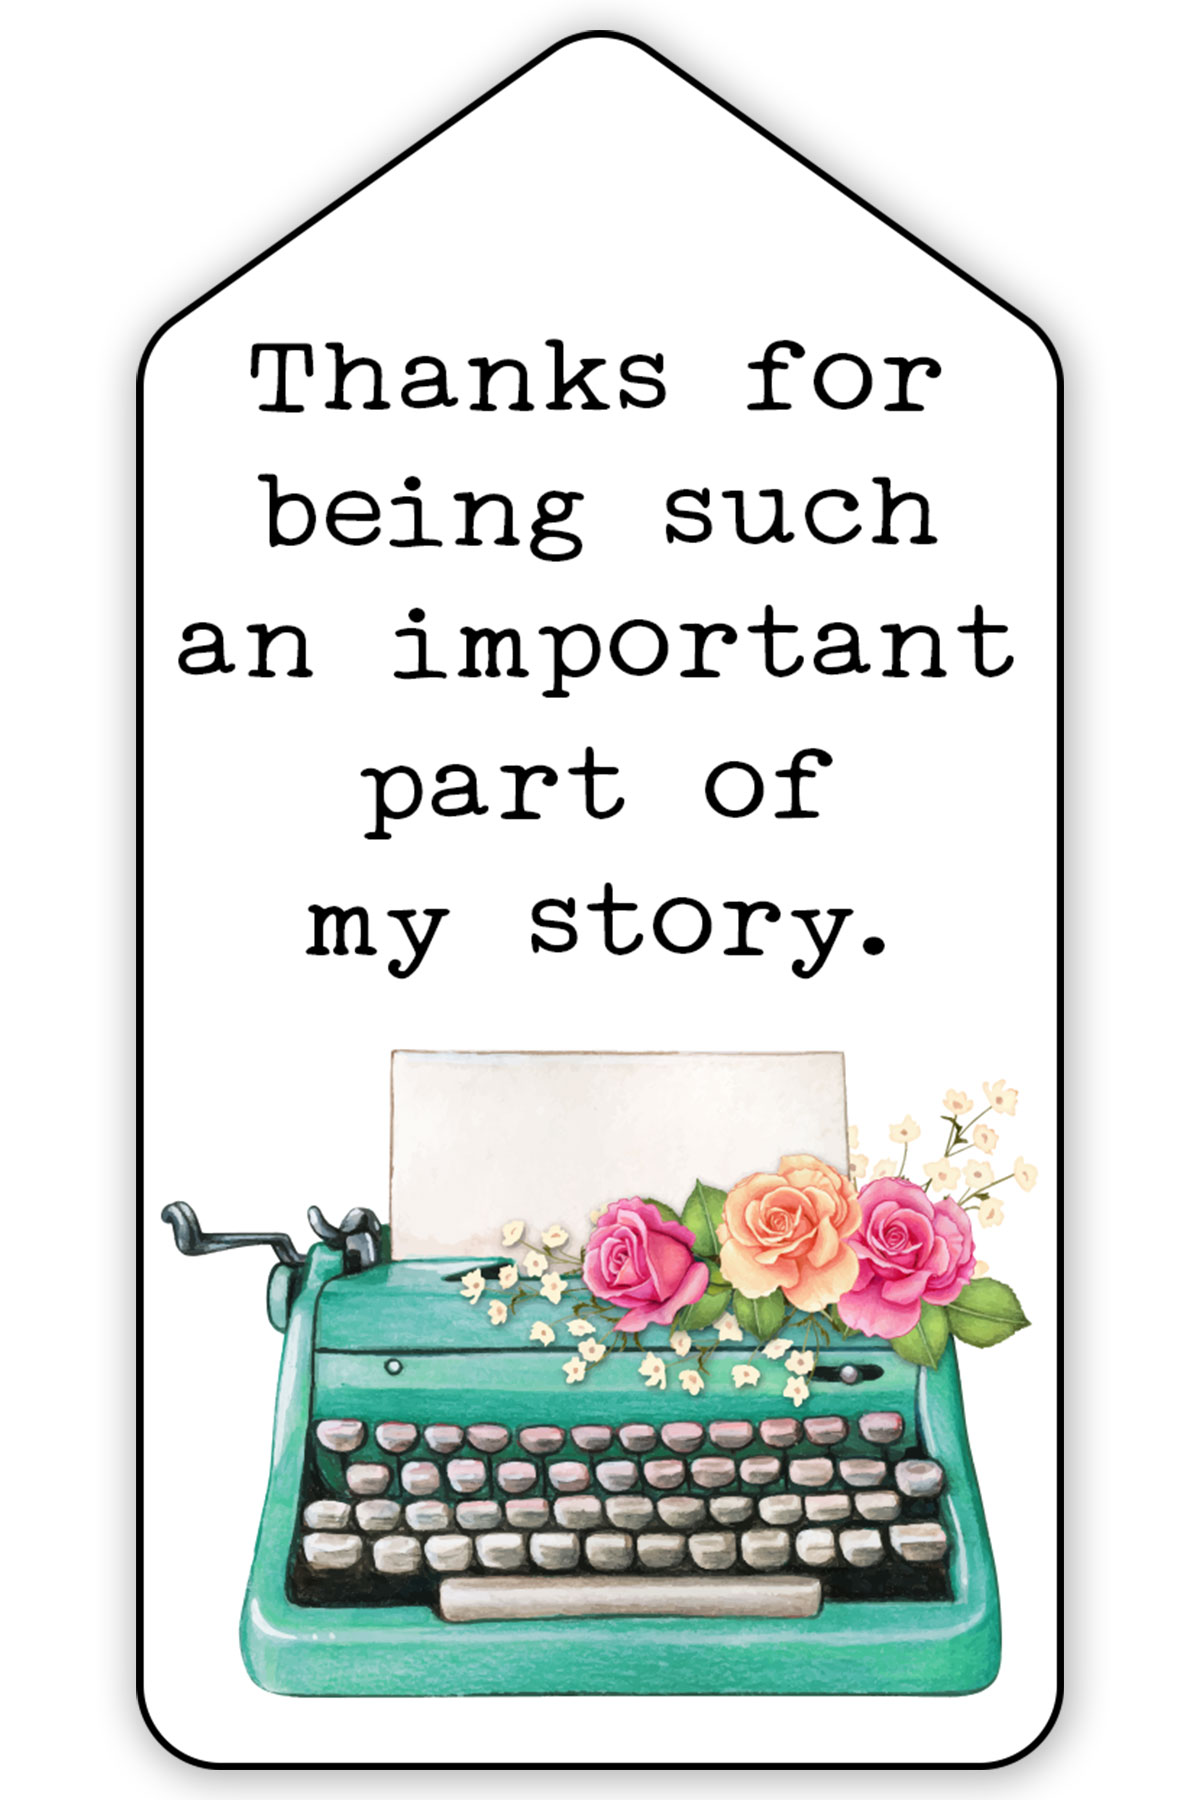 This free printable teacher appreciation gift tag says thanks for being such an important part of my story with a typewriter below it.